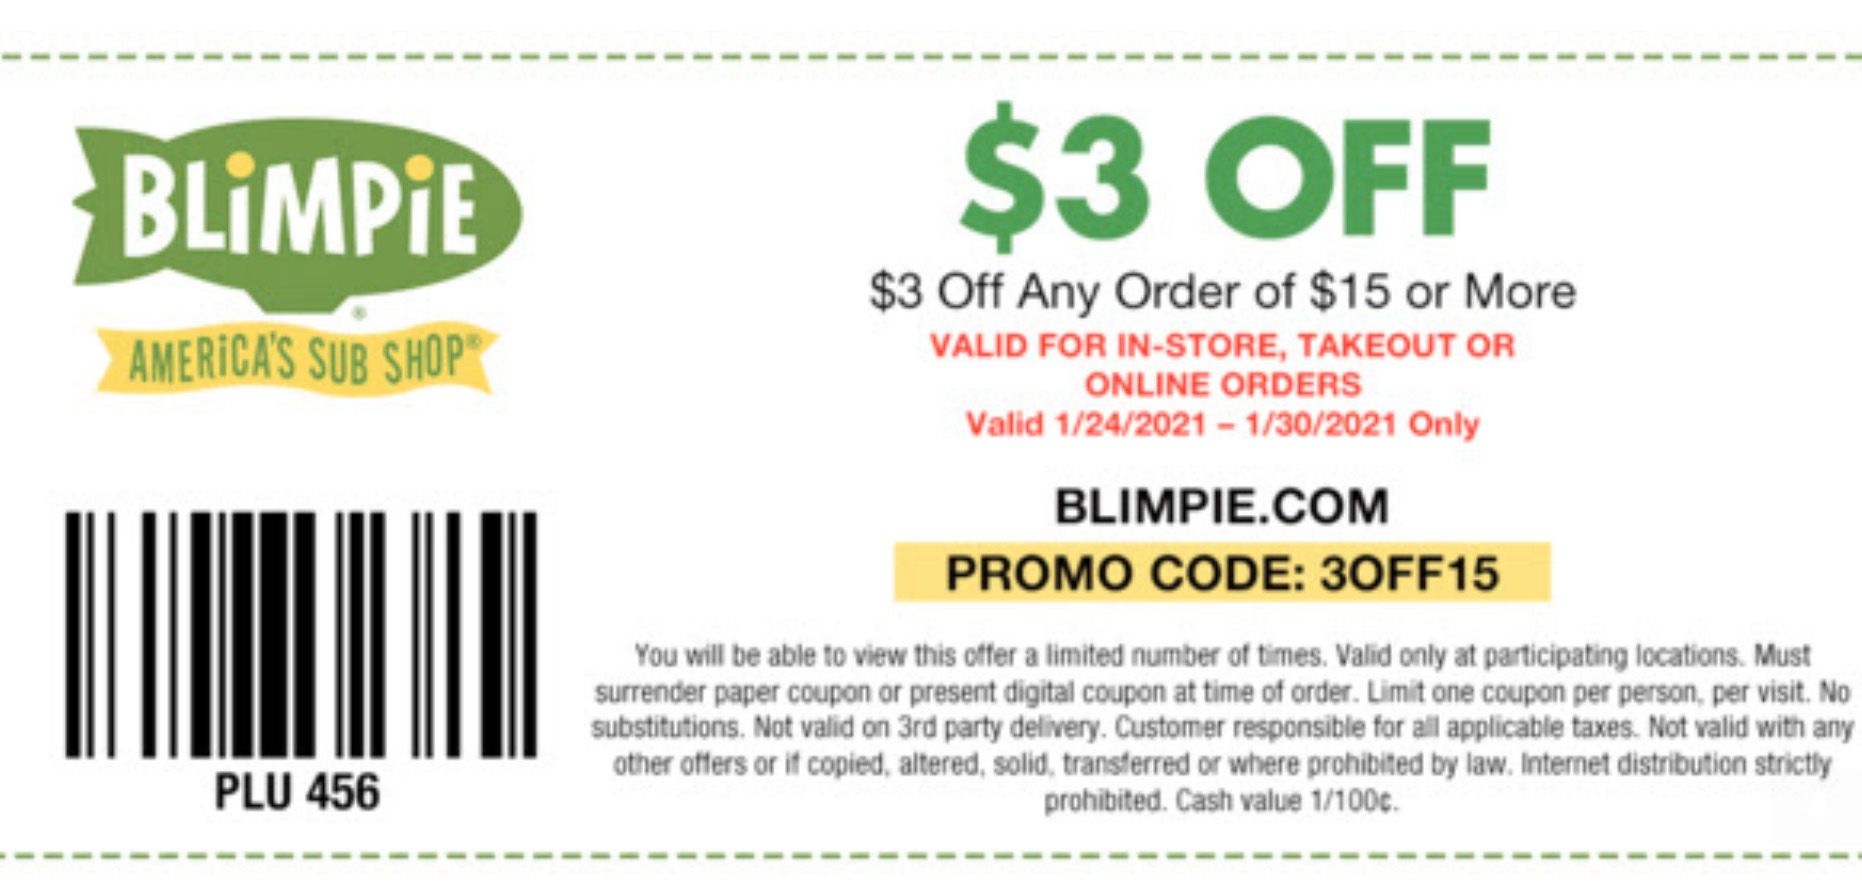 Blimpie's EClub Members Check Your Inbox for a $3 Off Coupon & Promo Code Valid Through to January 30